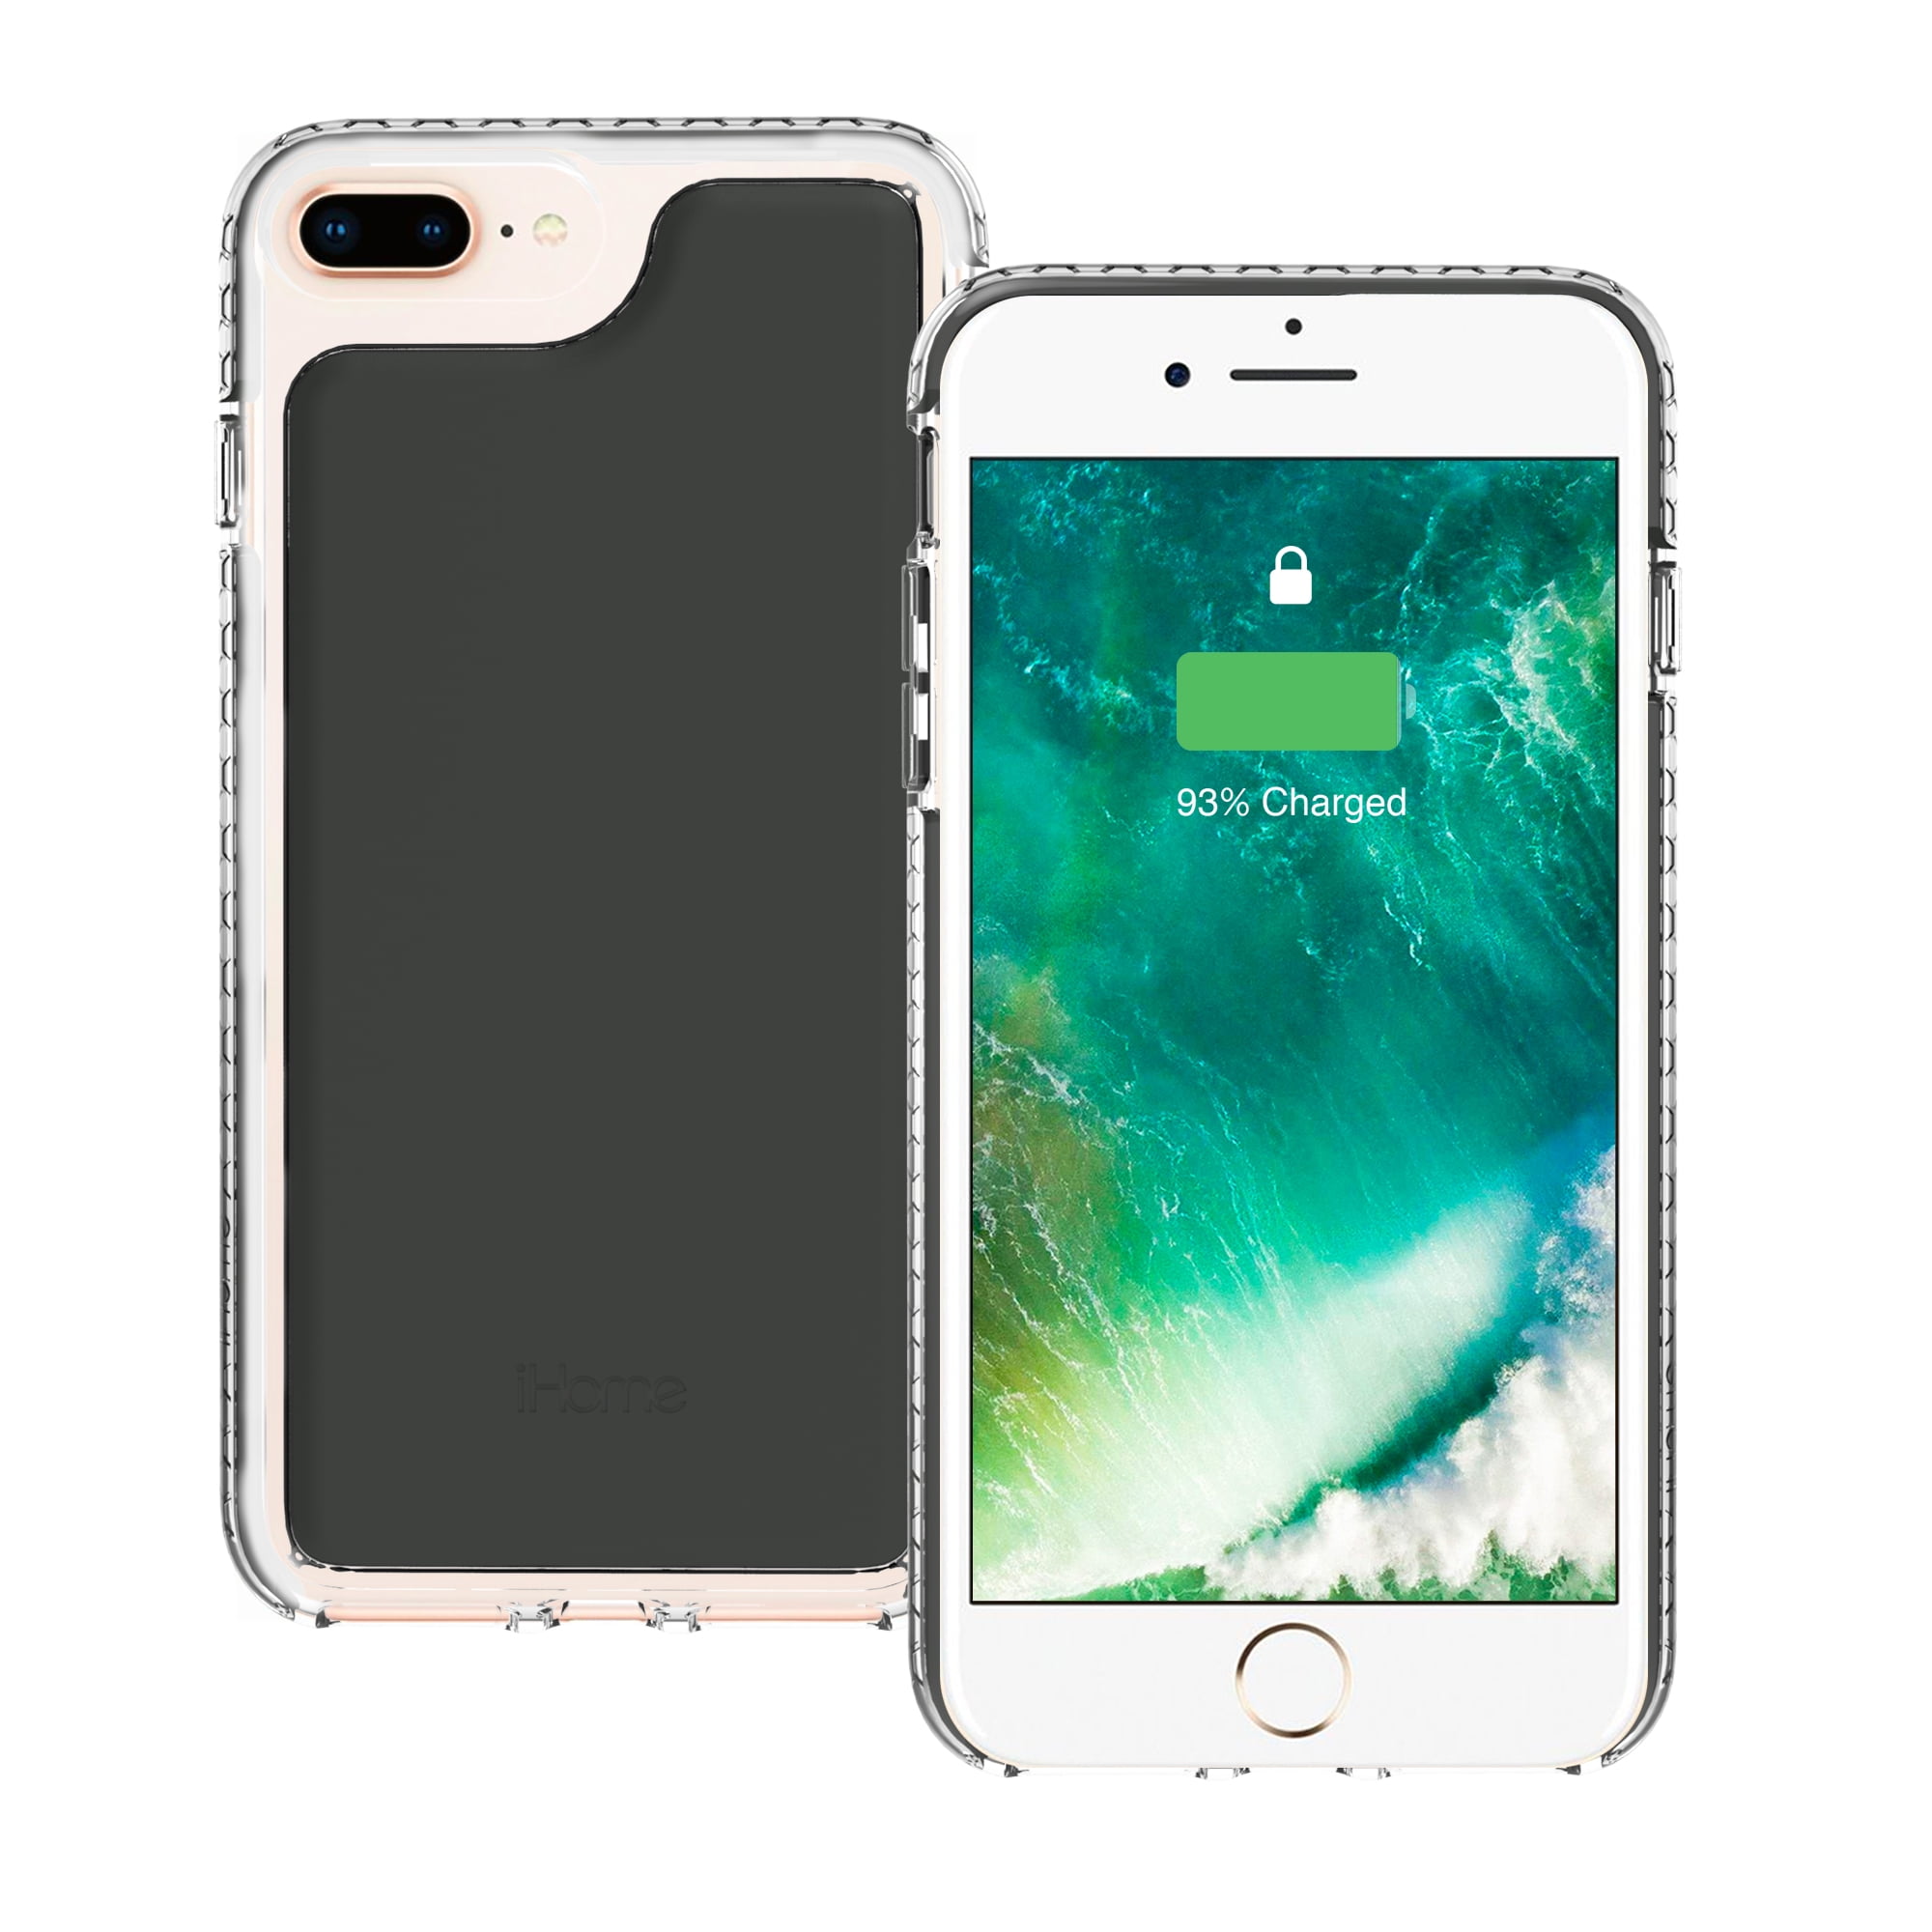 360 TWO TONE Silicone Protective Clear Cases iPhone 6 7 8 Plus BUY 2 GET 1 FREE 